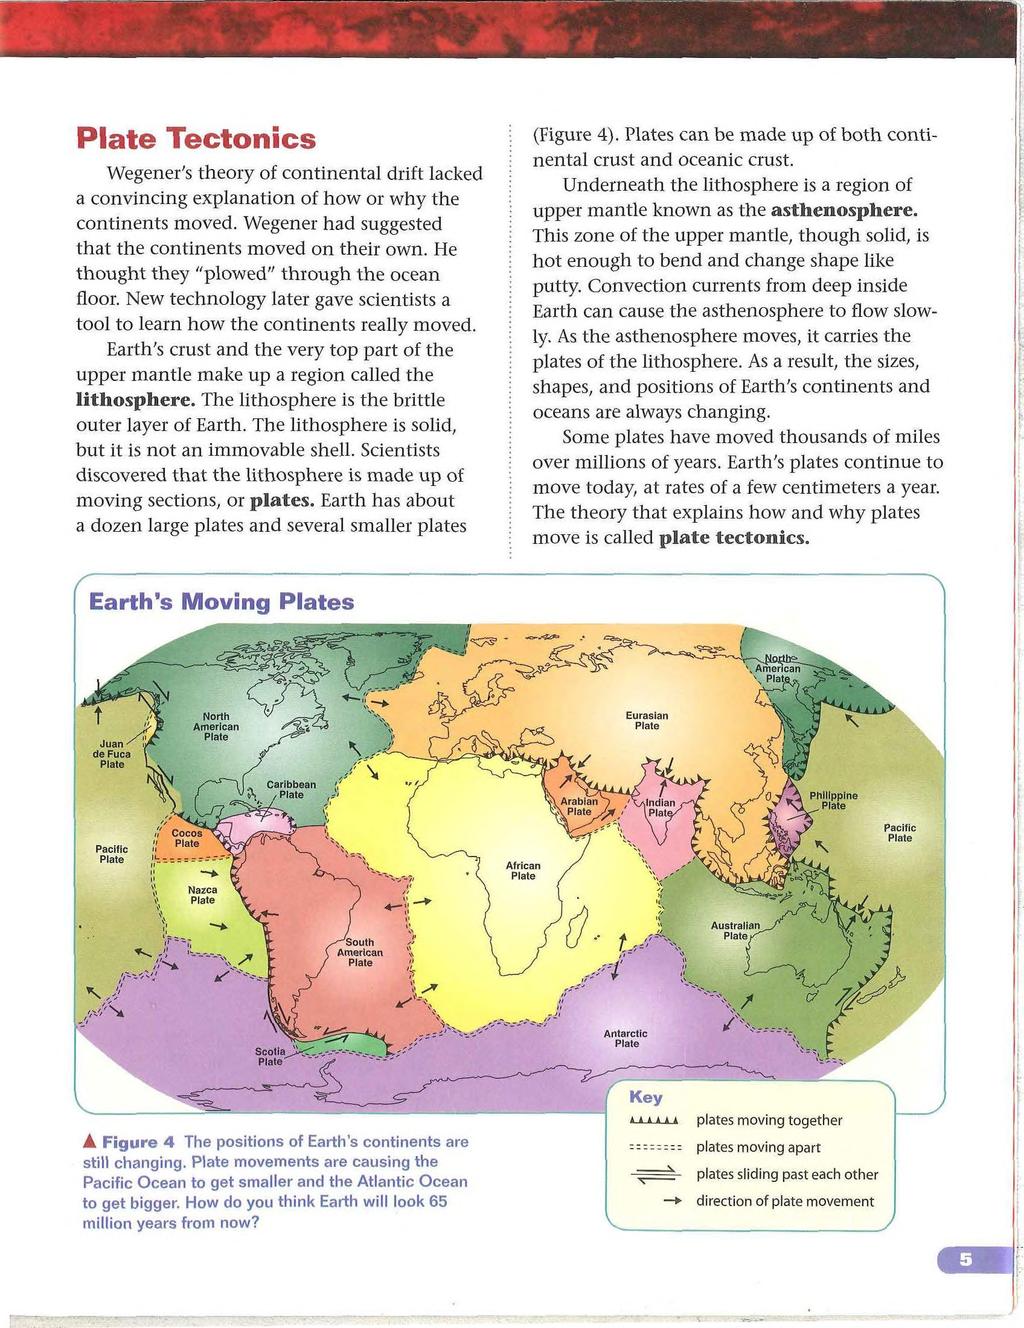 Plate Tectonics Wegener s theory of continental drift lacked a convincing explanation of how or why the continents moved. Wegener had suggested that the continents moved on their own.